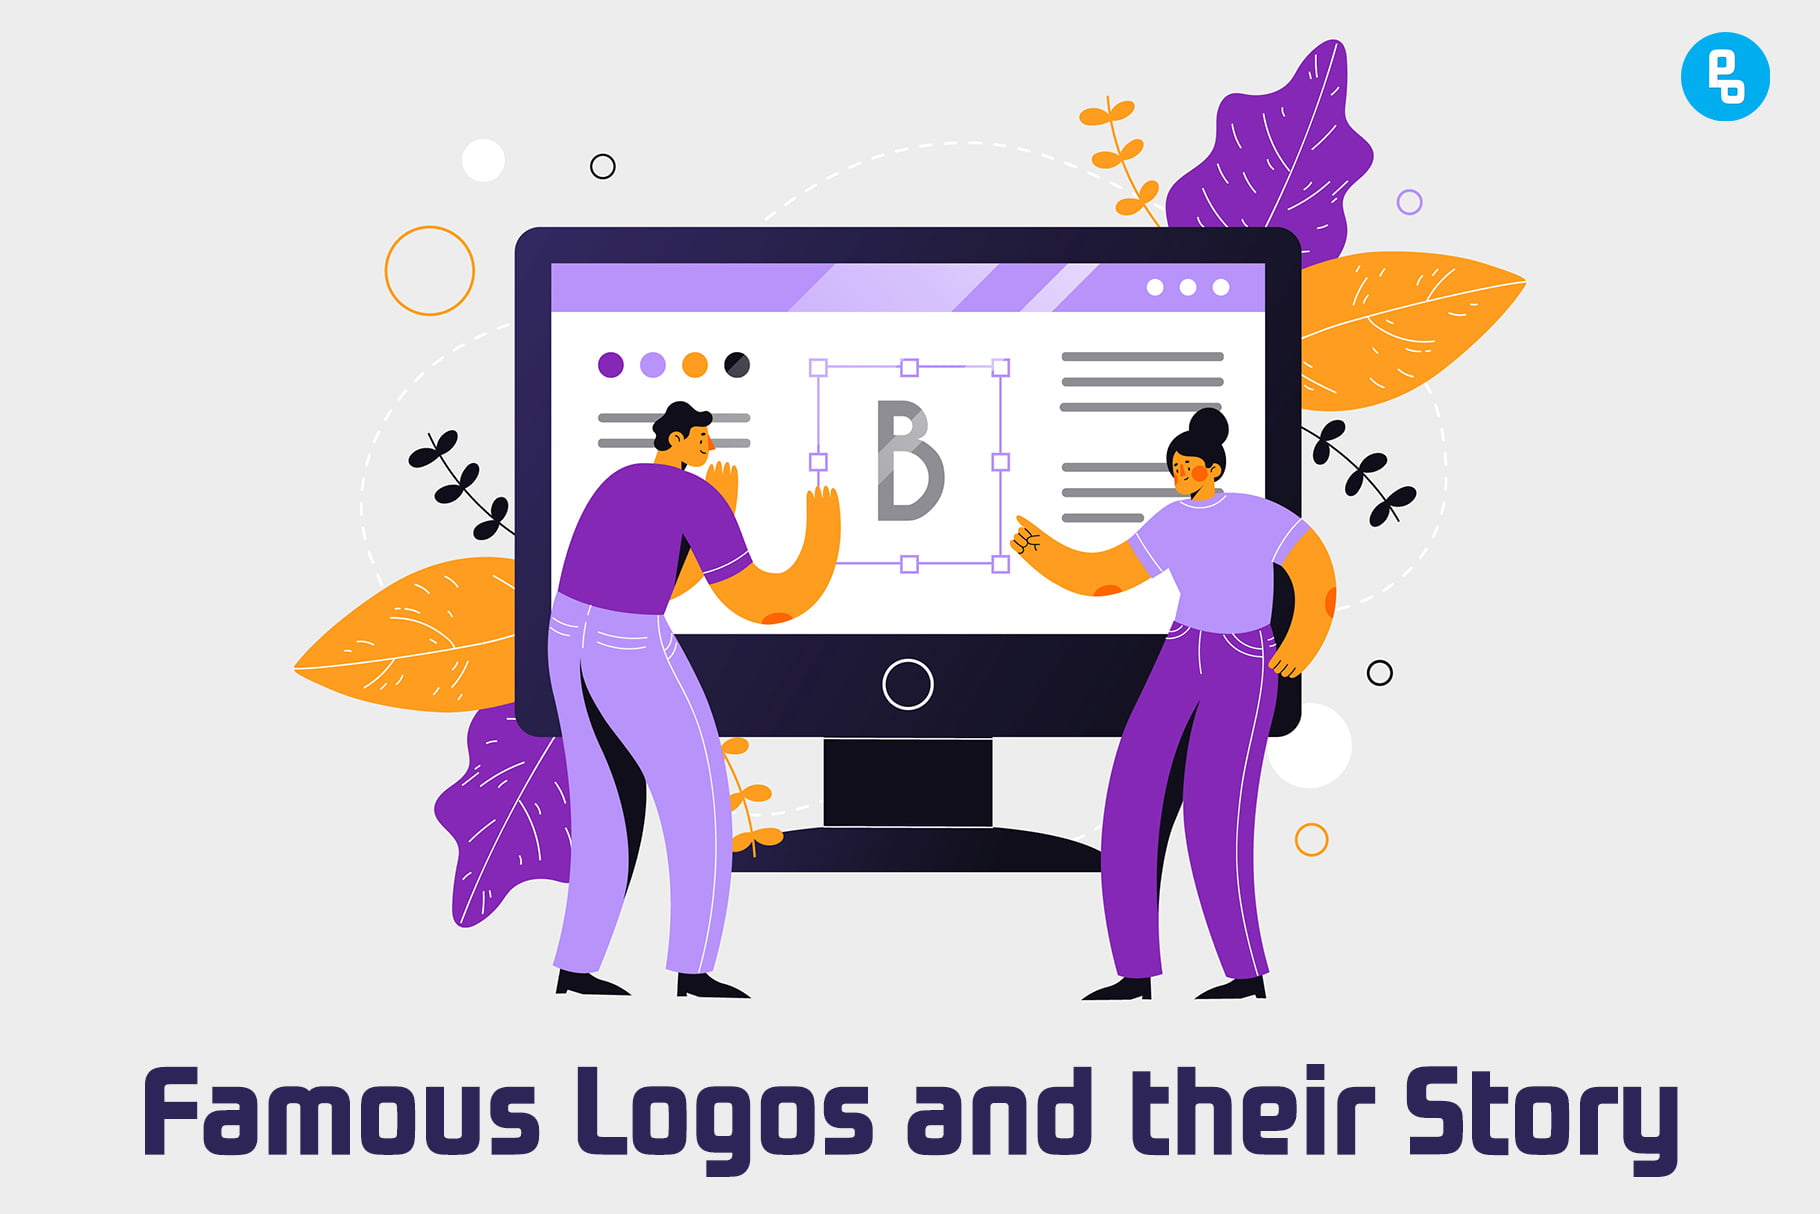 The logos below have been used for decades and are instantly recognizable by millions of people around the world. Here's what you need to know about some of these famous brand logos: